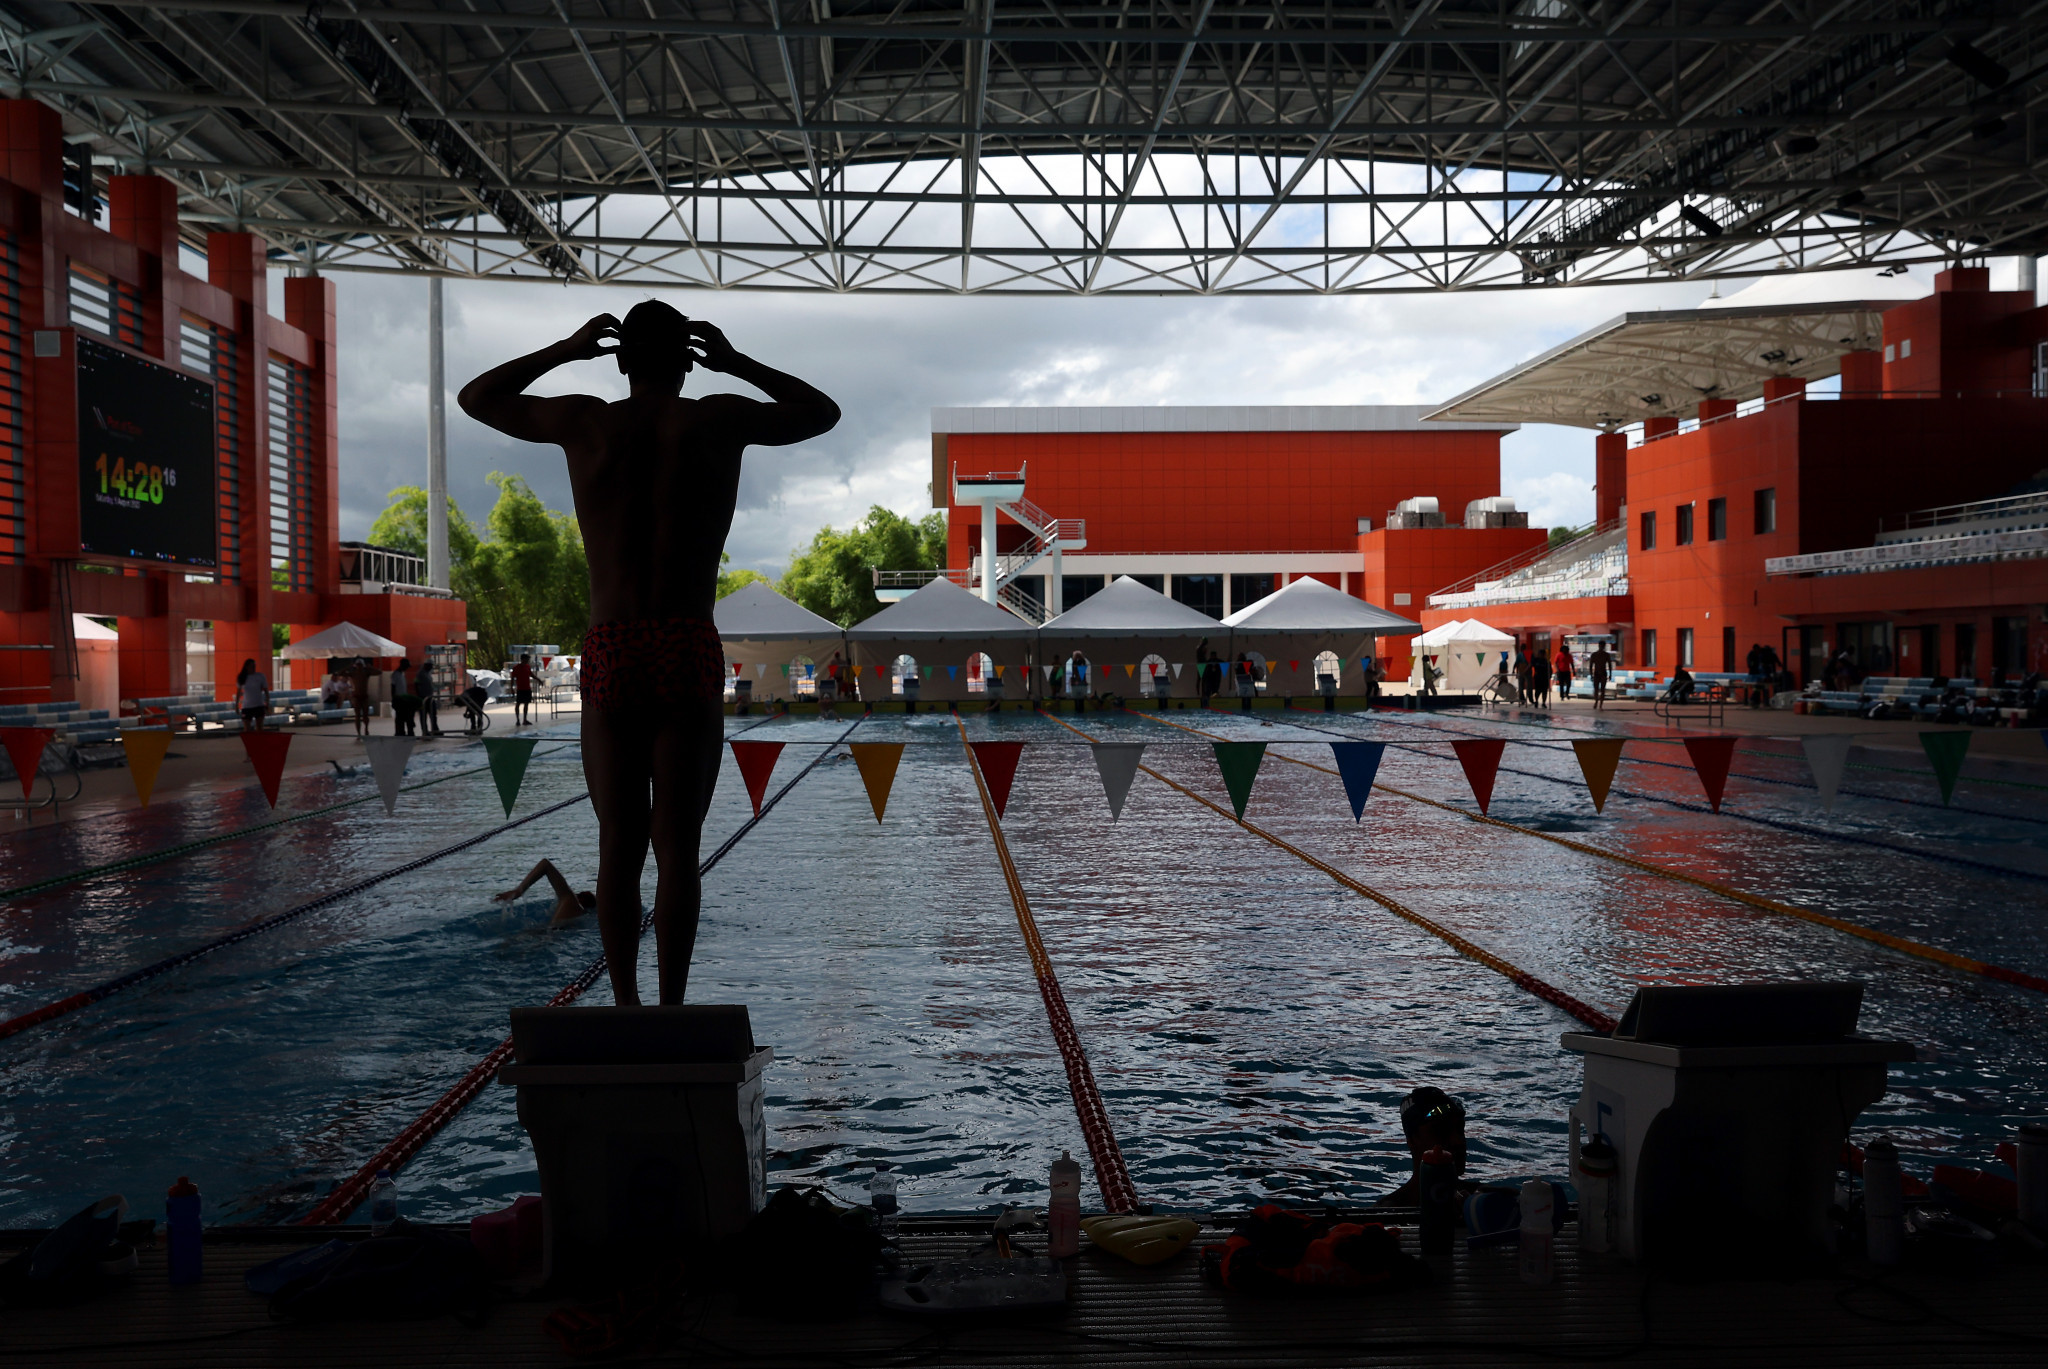 Swimming training was held today at the National Aquatic Centre prior to the start of competition tomorrow ©Getty Images